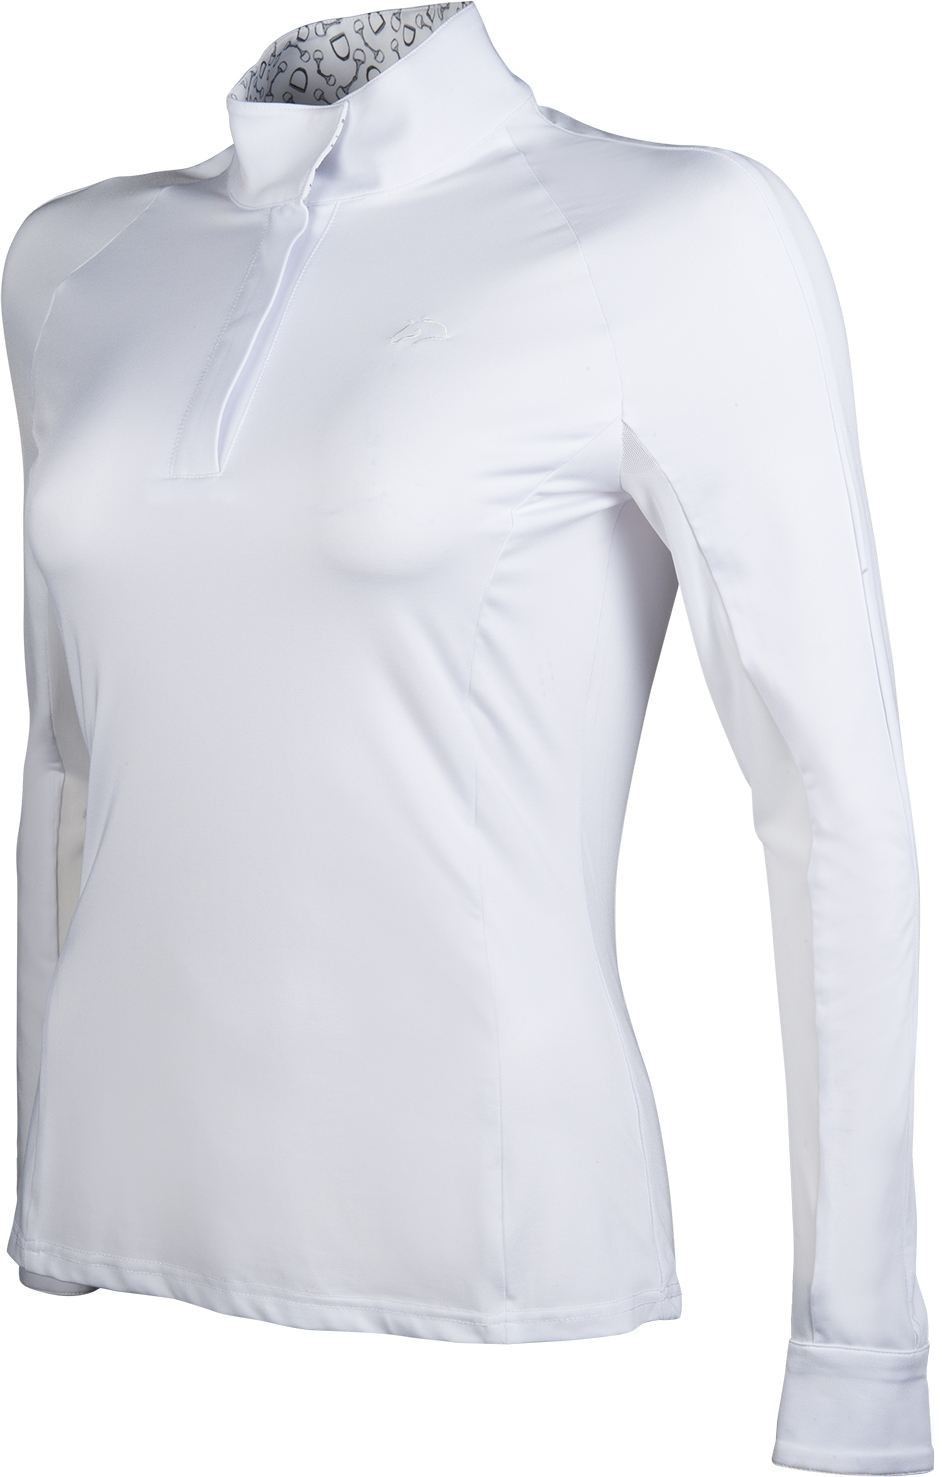 HKM Competition Shirt Hunter Long Sleeve - Just Horse Riders